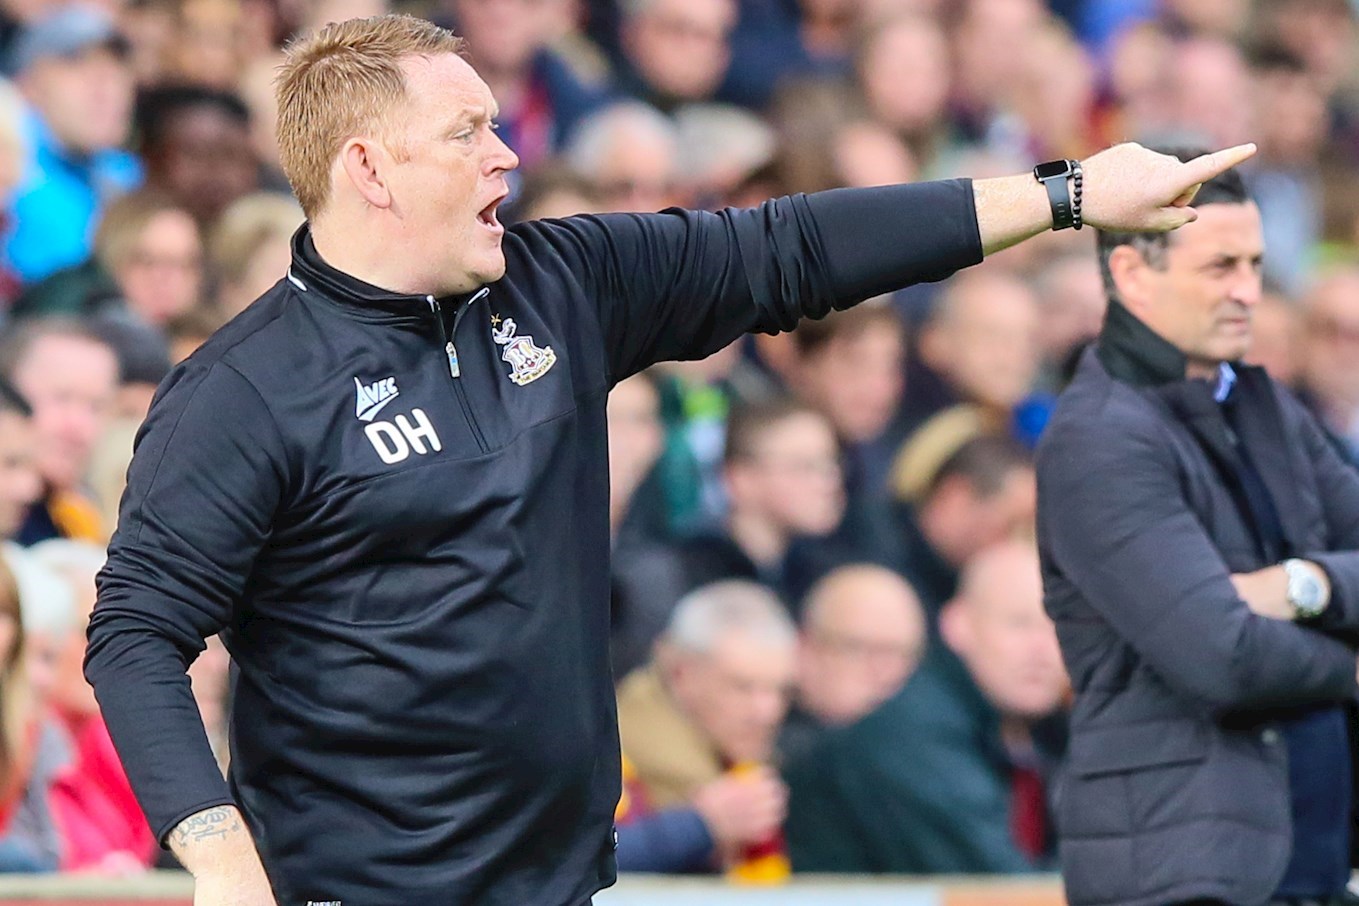 HOPKIN: 'WE HAVE TO GET OUR APPROACH RIGHT' - News - Bradford City1359 x 906